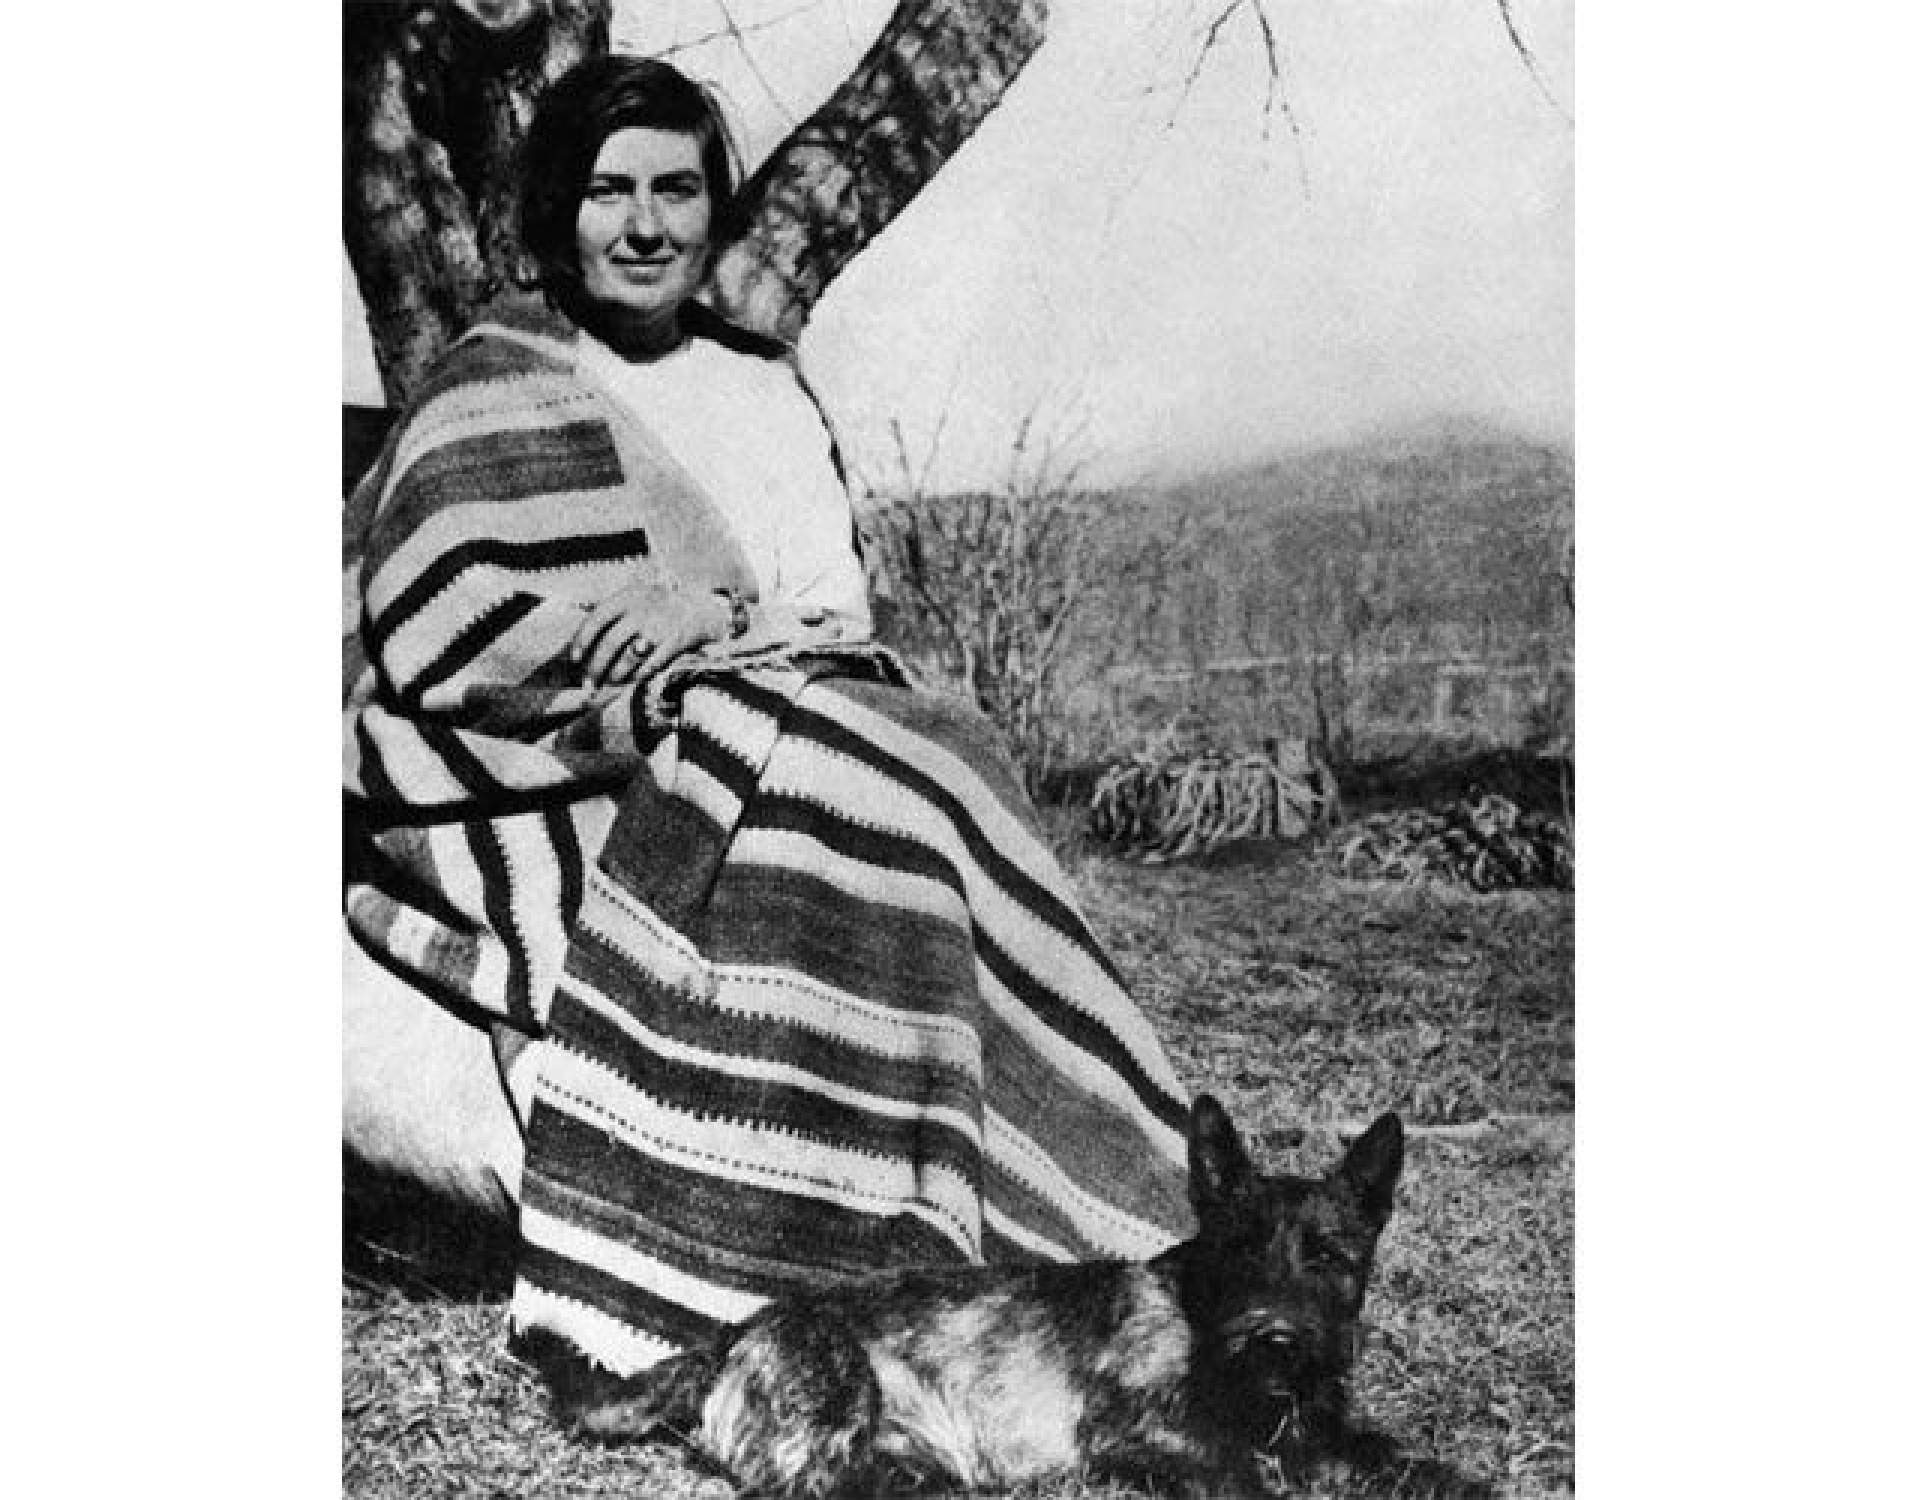 Lecture on Mabel Dodge Luhan in today's Buffalo News